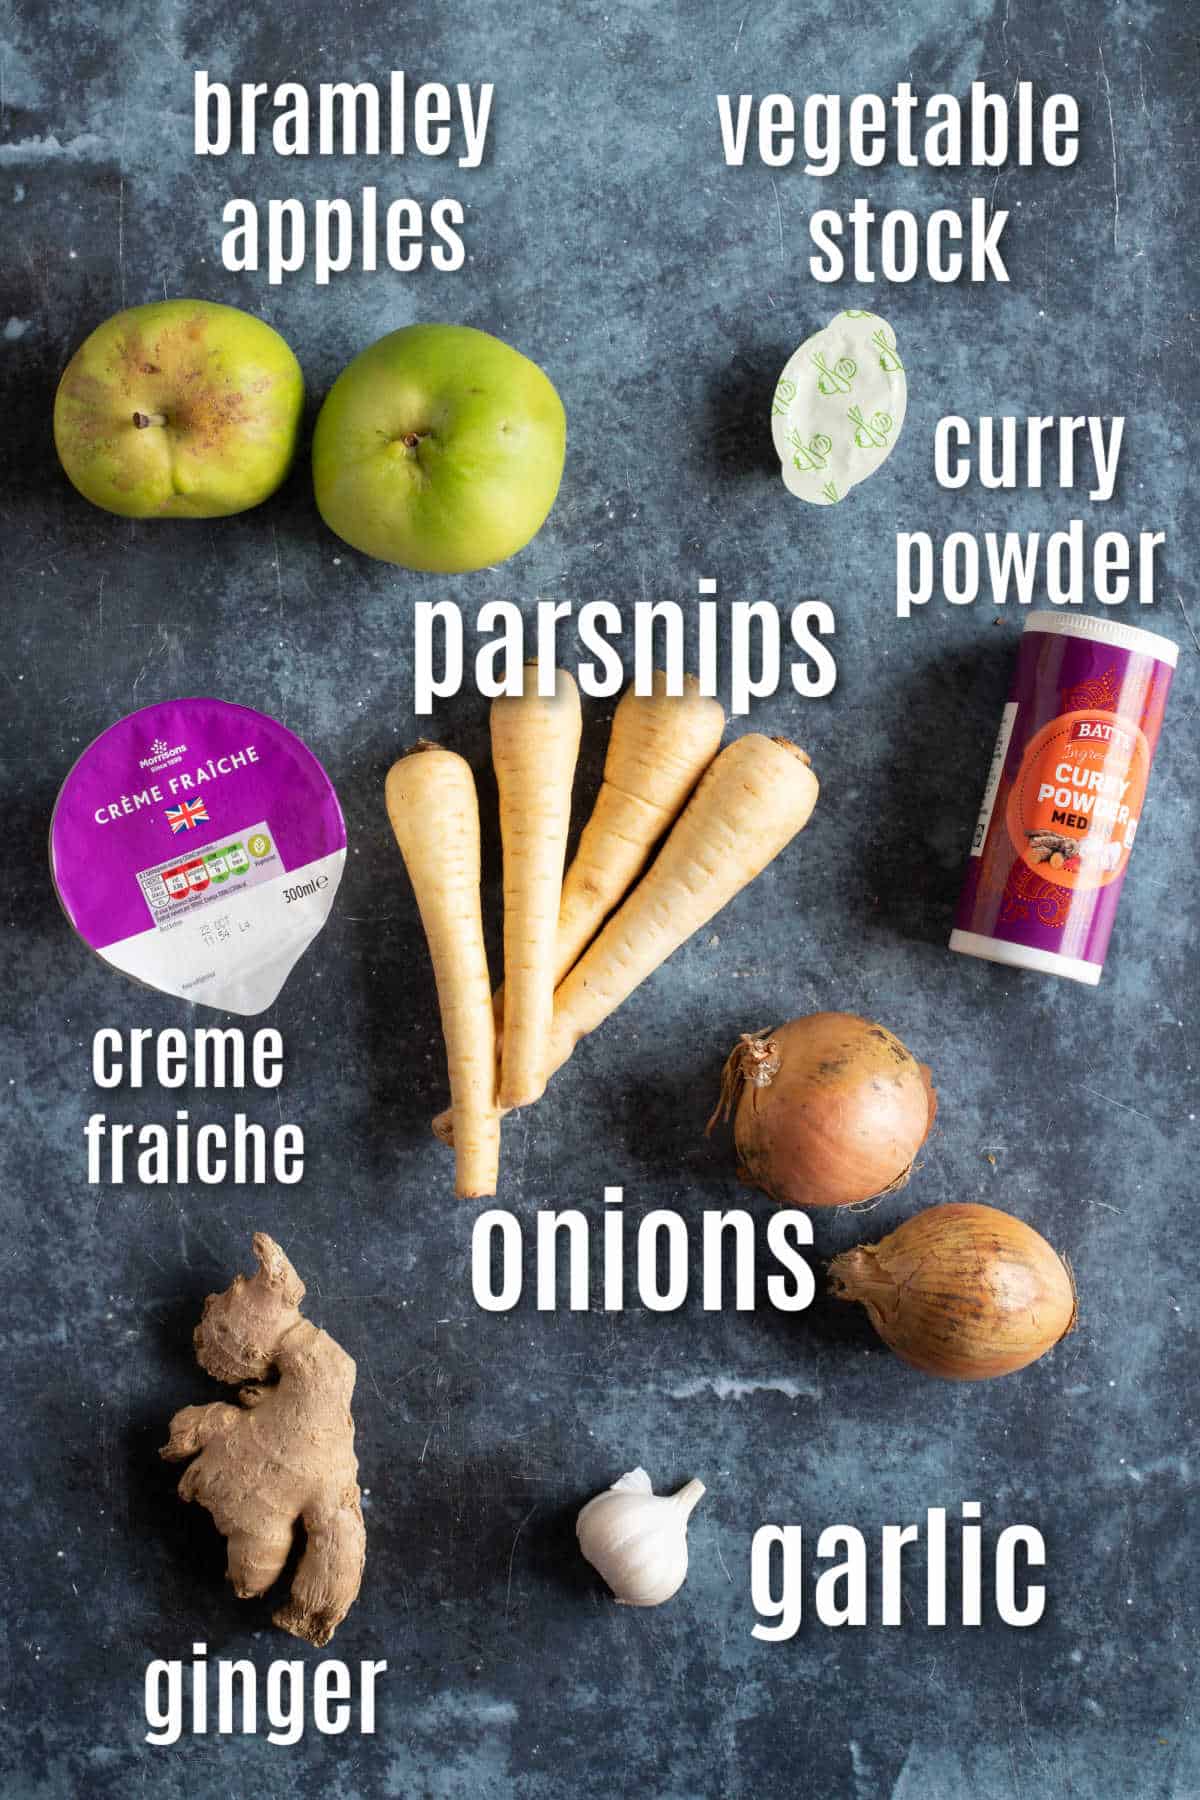 Ingredients for curried parsnip and apple soup.